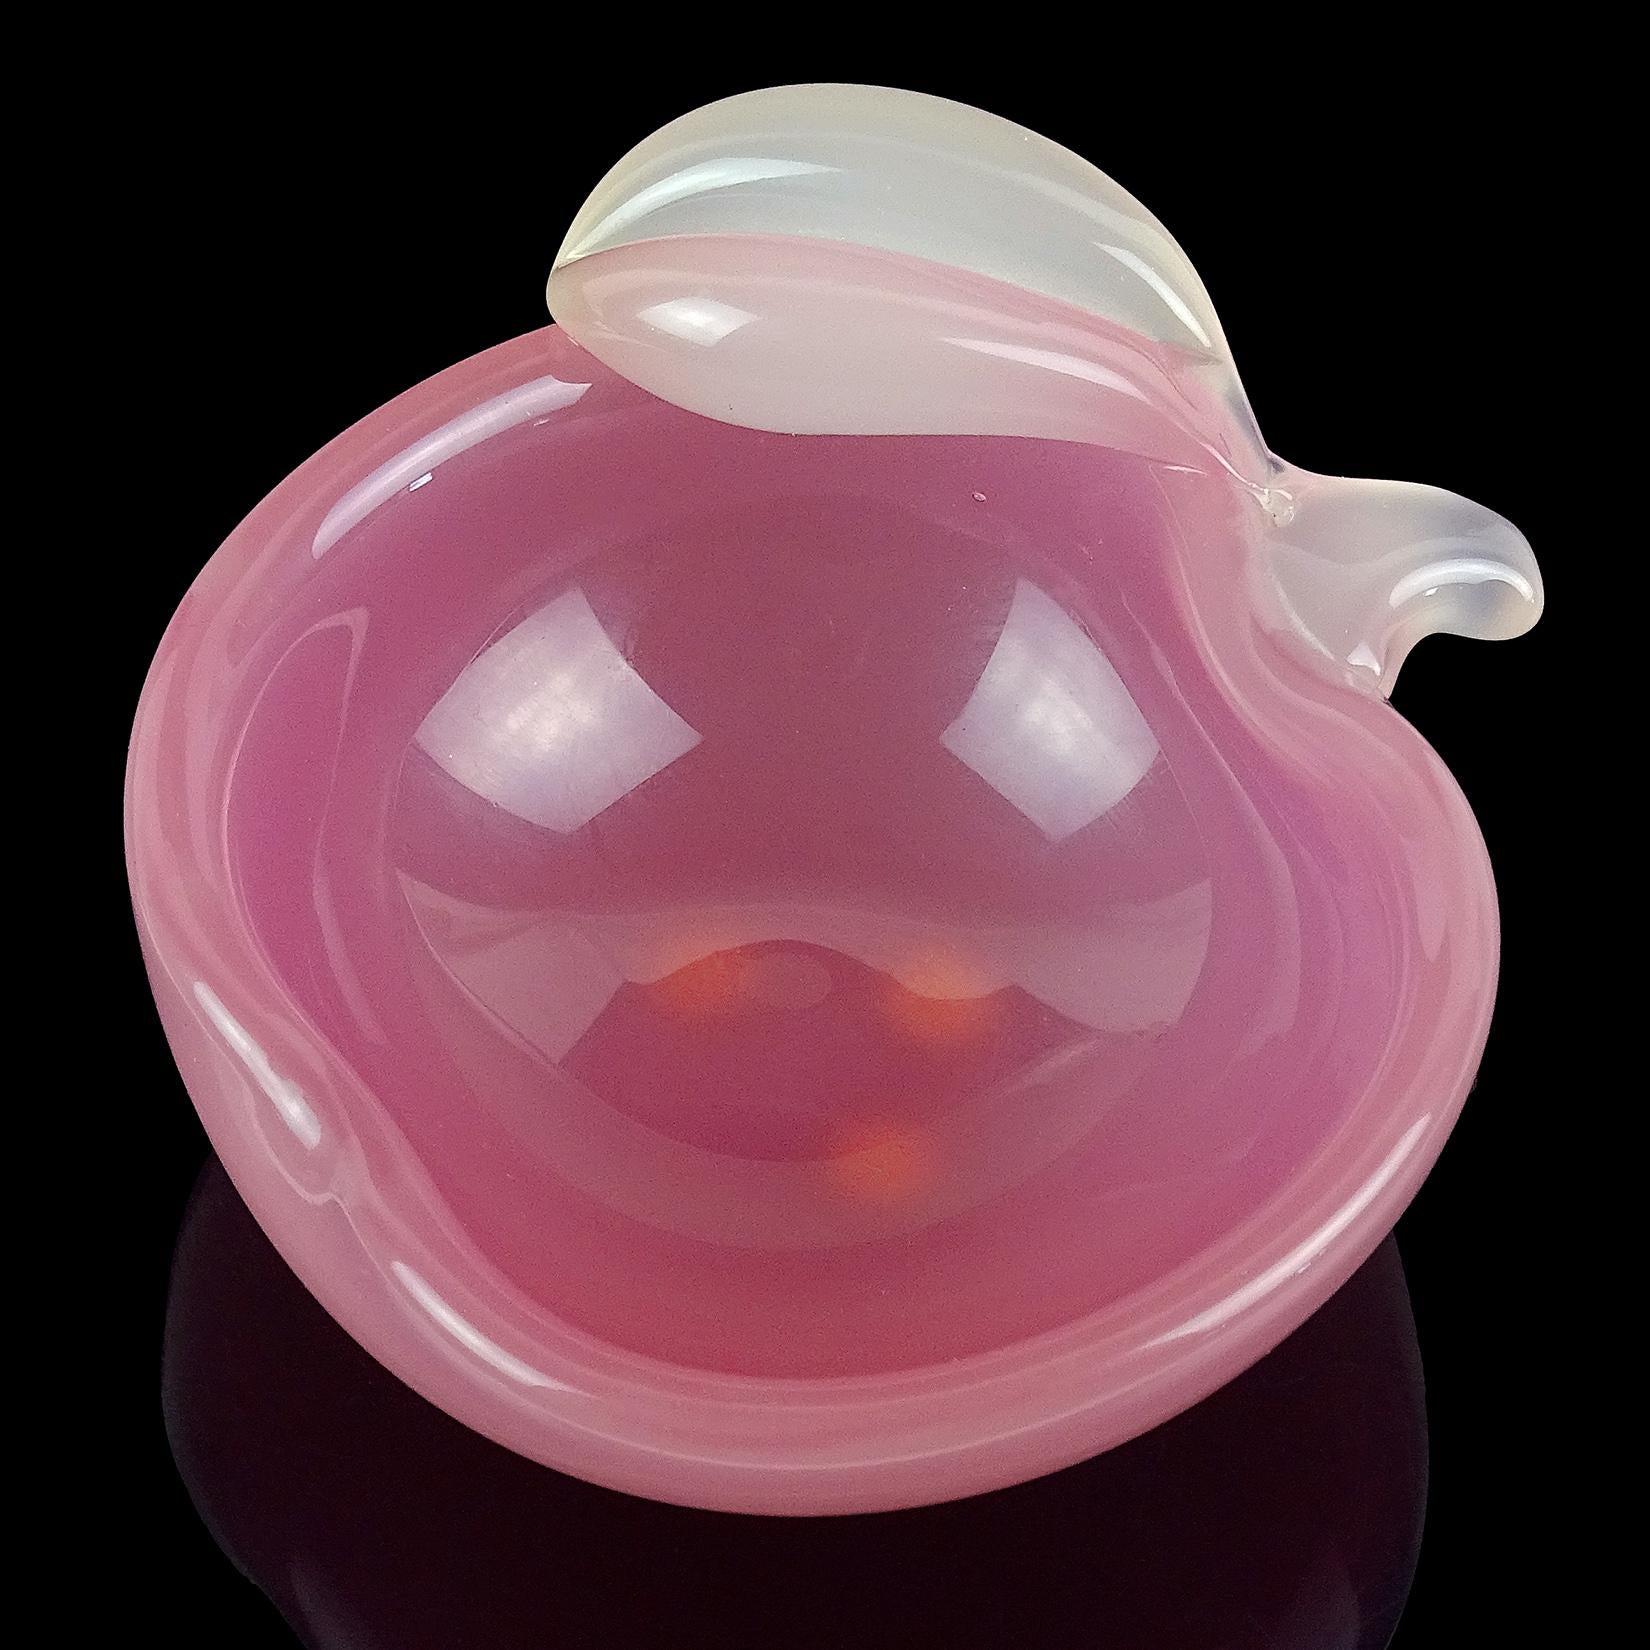 Beautiful vintage Murano hand blown opalescent pink and white Italian art glass apple shaped decorative bowl. Documented to designer Archimede Seguso, from the “Alabastro” series. Can be used as a display piece on any table. Perfect as a ring or